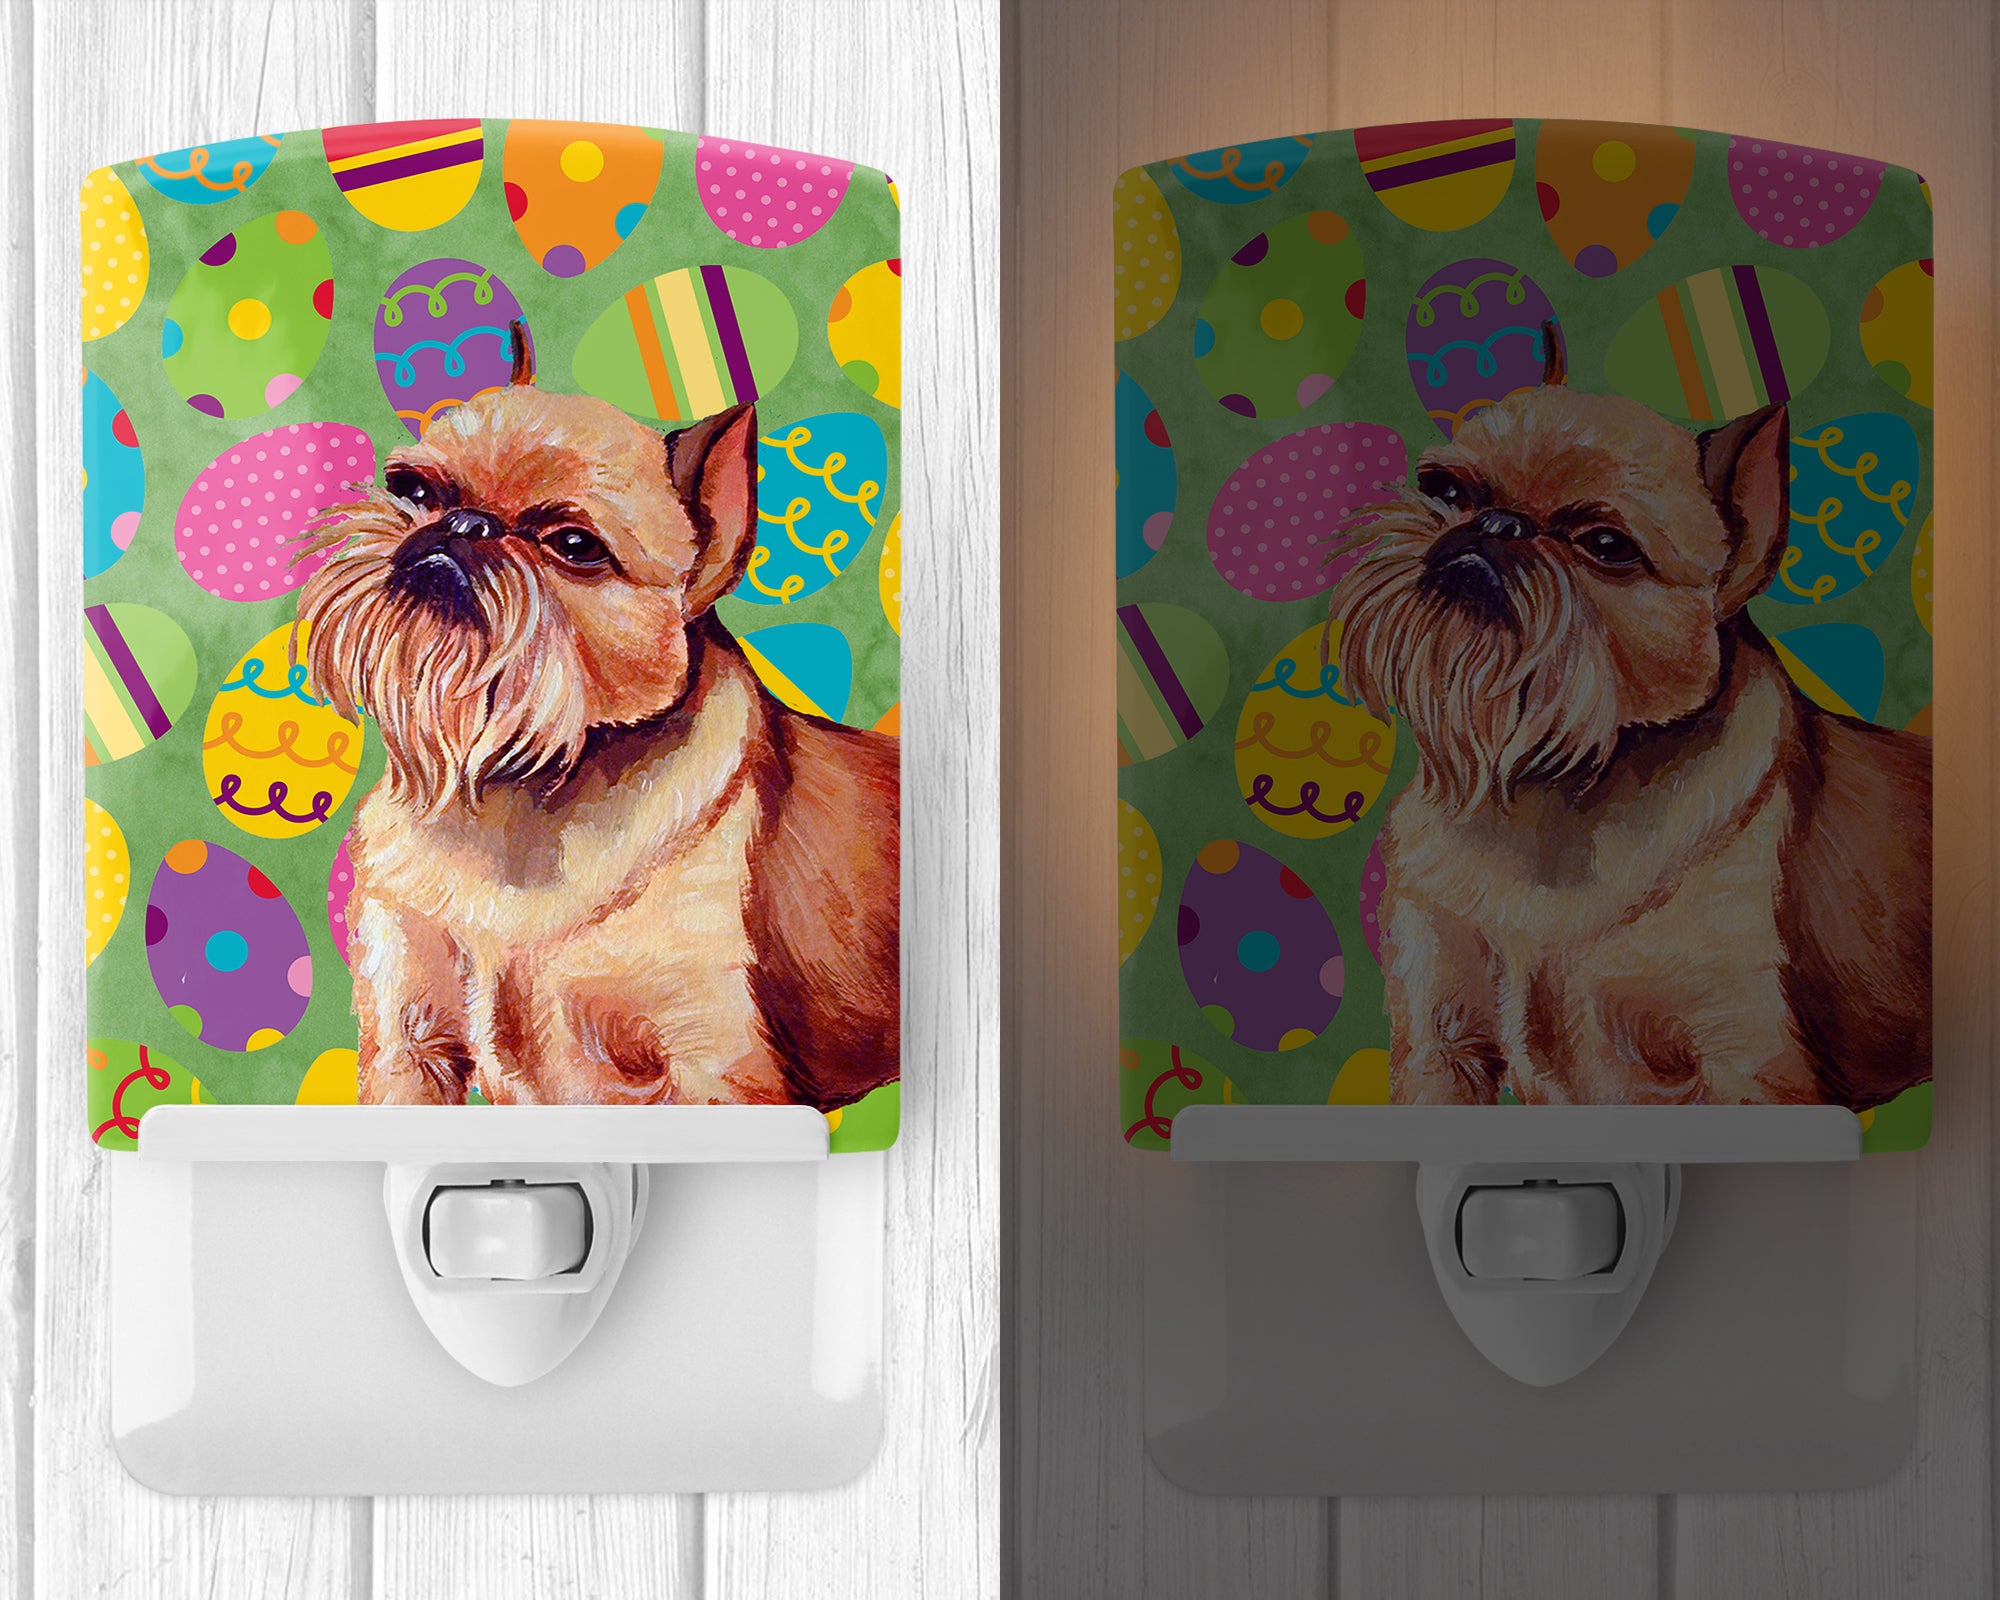 Brussels Griffon Easter Eggtravaganza Ceramic Night Light LH9404CNL - the-store.com